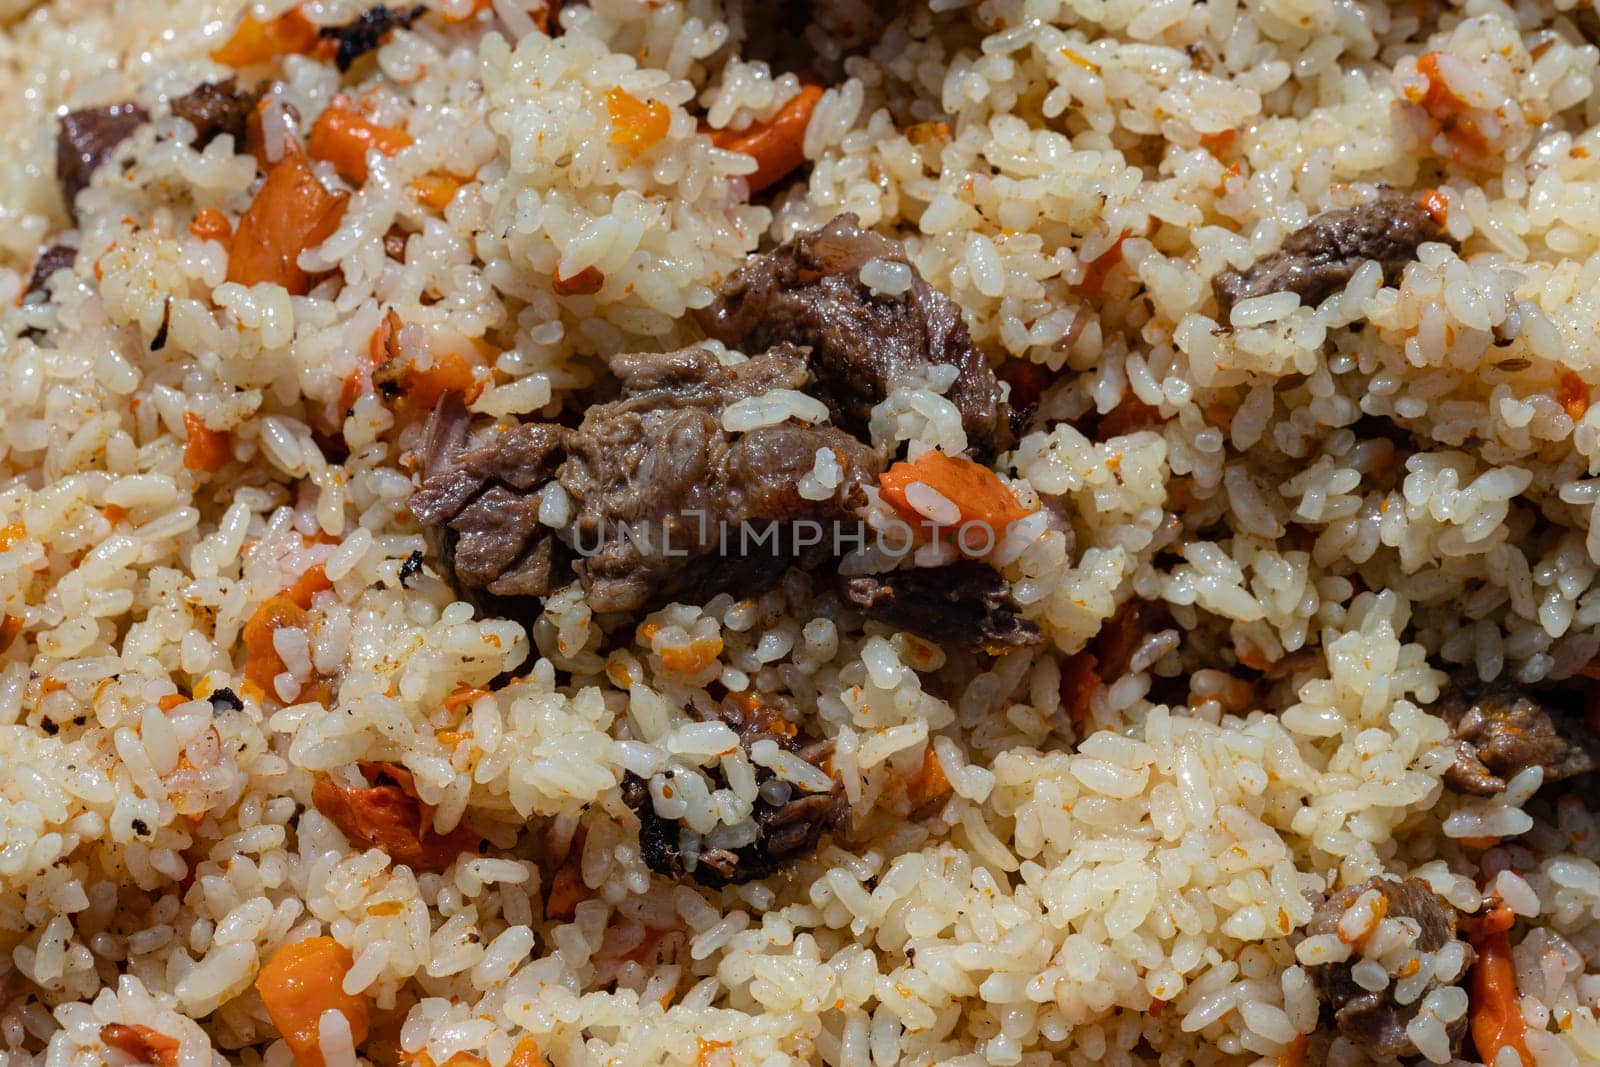 Close-up view of Asian tasty food background. Traditional Eastern culinary dish - pilaf. Ingredients: rice with slices of meat, fat and vegetables (carrot, garlic), spices - popular recipe.